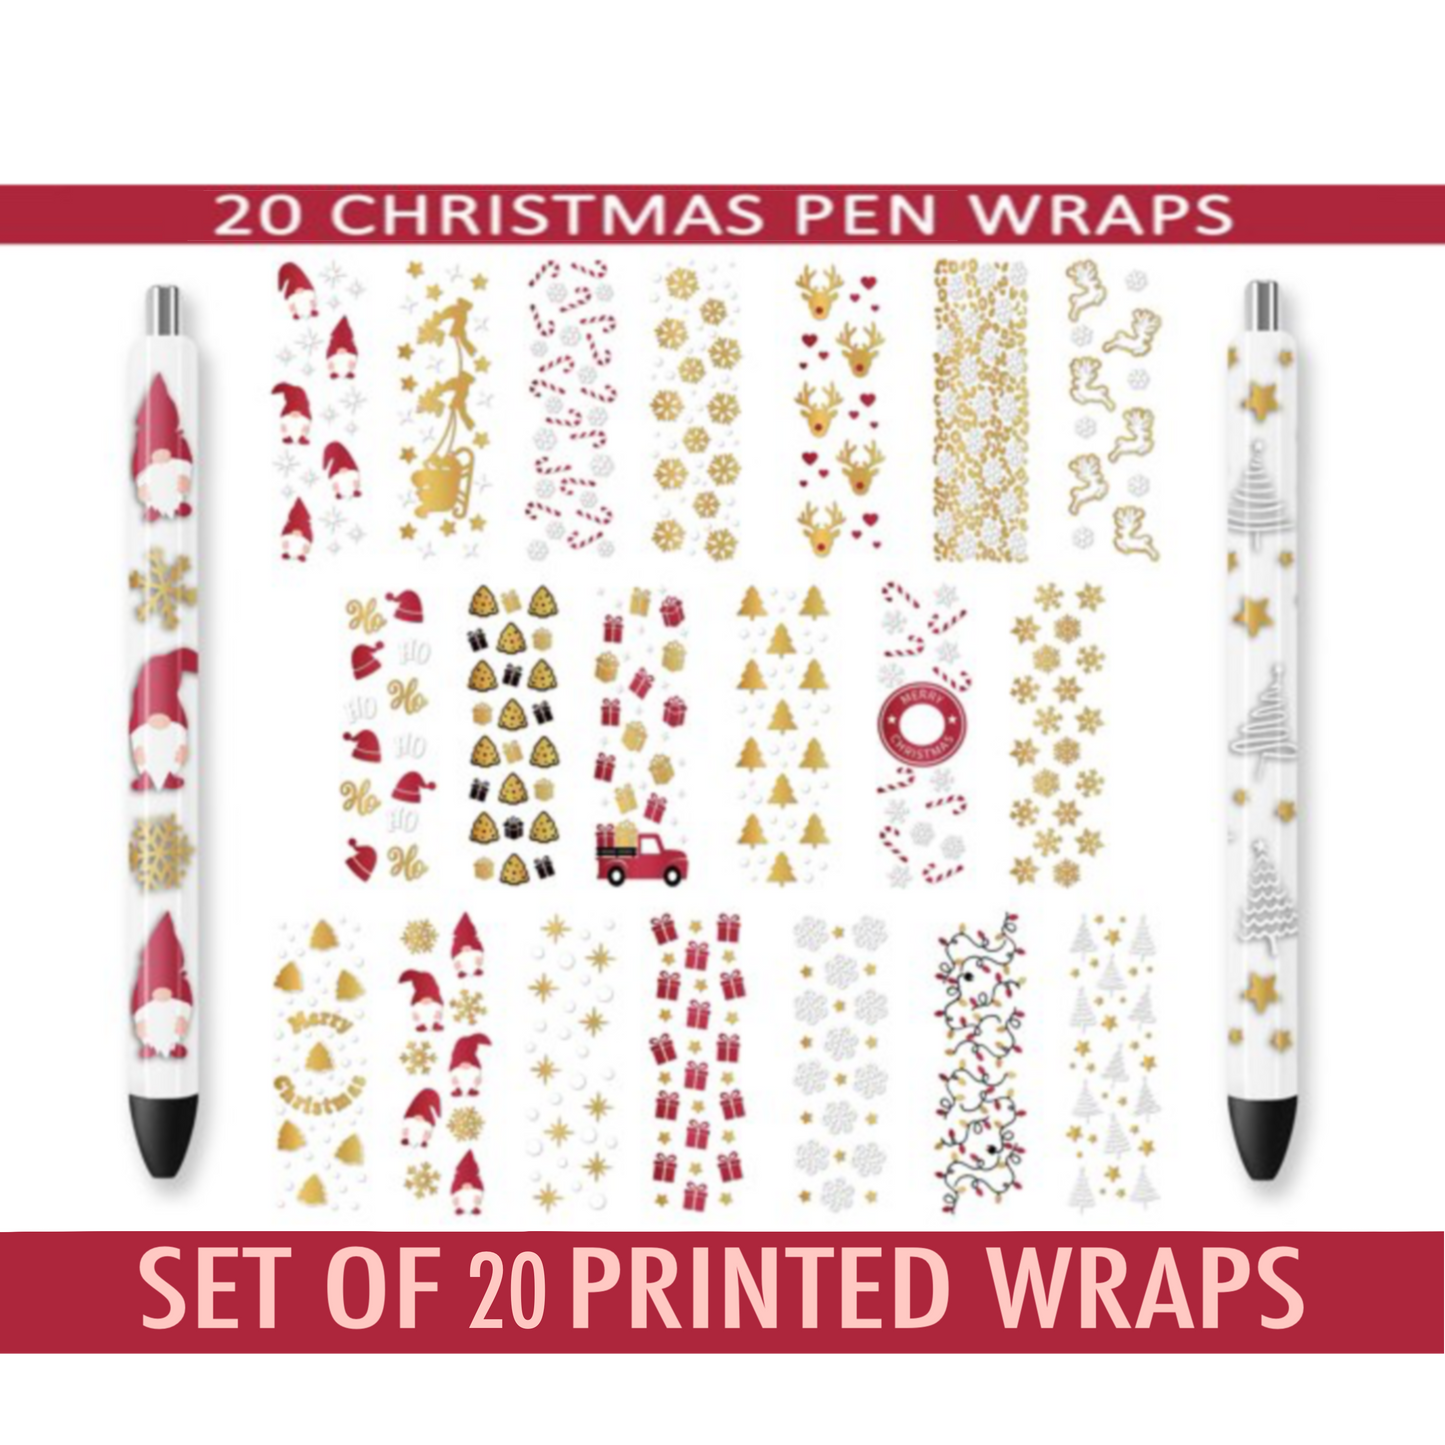 20 Christmas Pen Wraps - Cheat Clear Waterslide™ for All Pen Colors